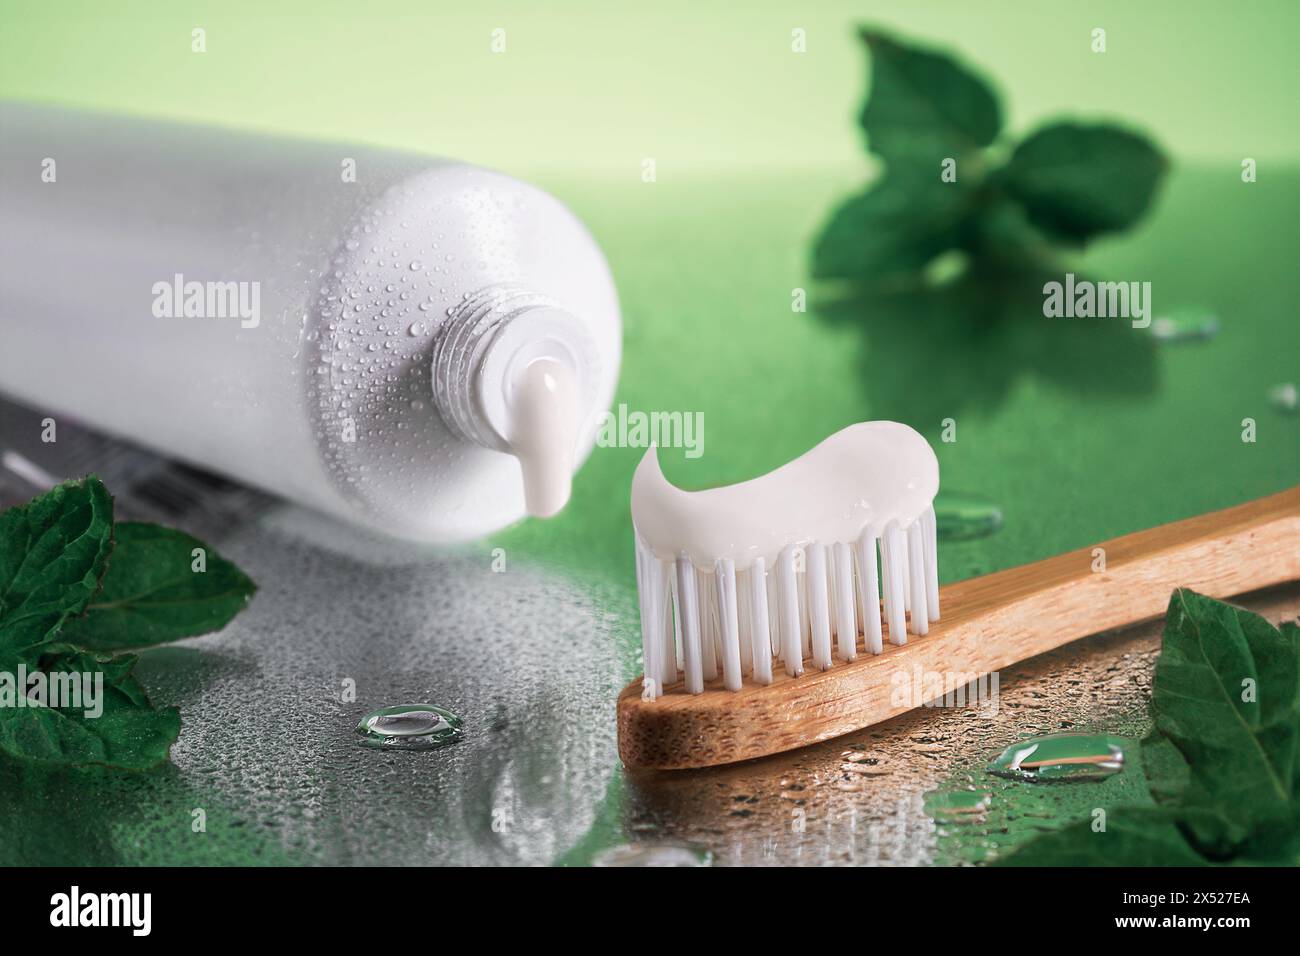 Closeup tube of toothpaste and bamboo toothbrush.Concept oral health and care. Stock Photo